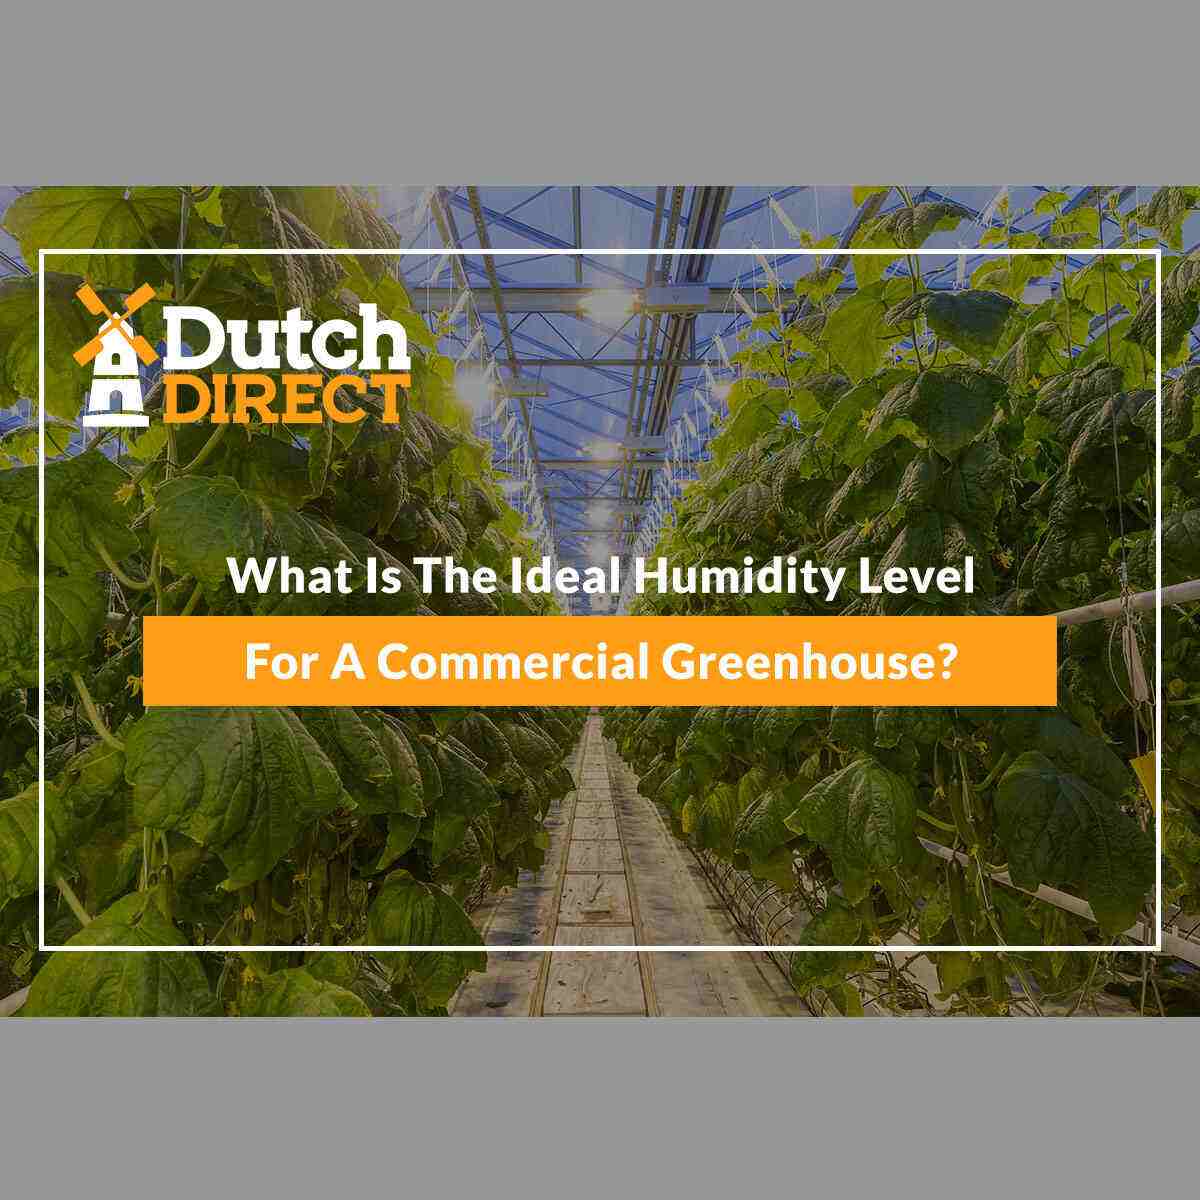 What Is The Ideal Humidity Level For A Commercial Greenhouse?